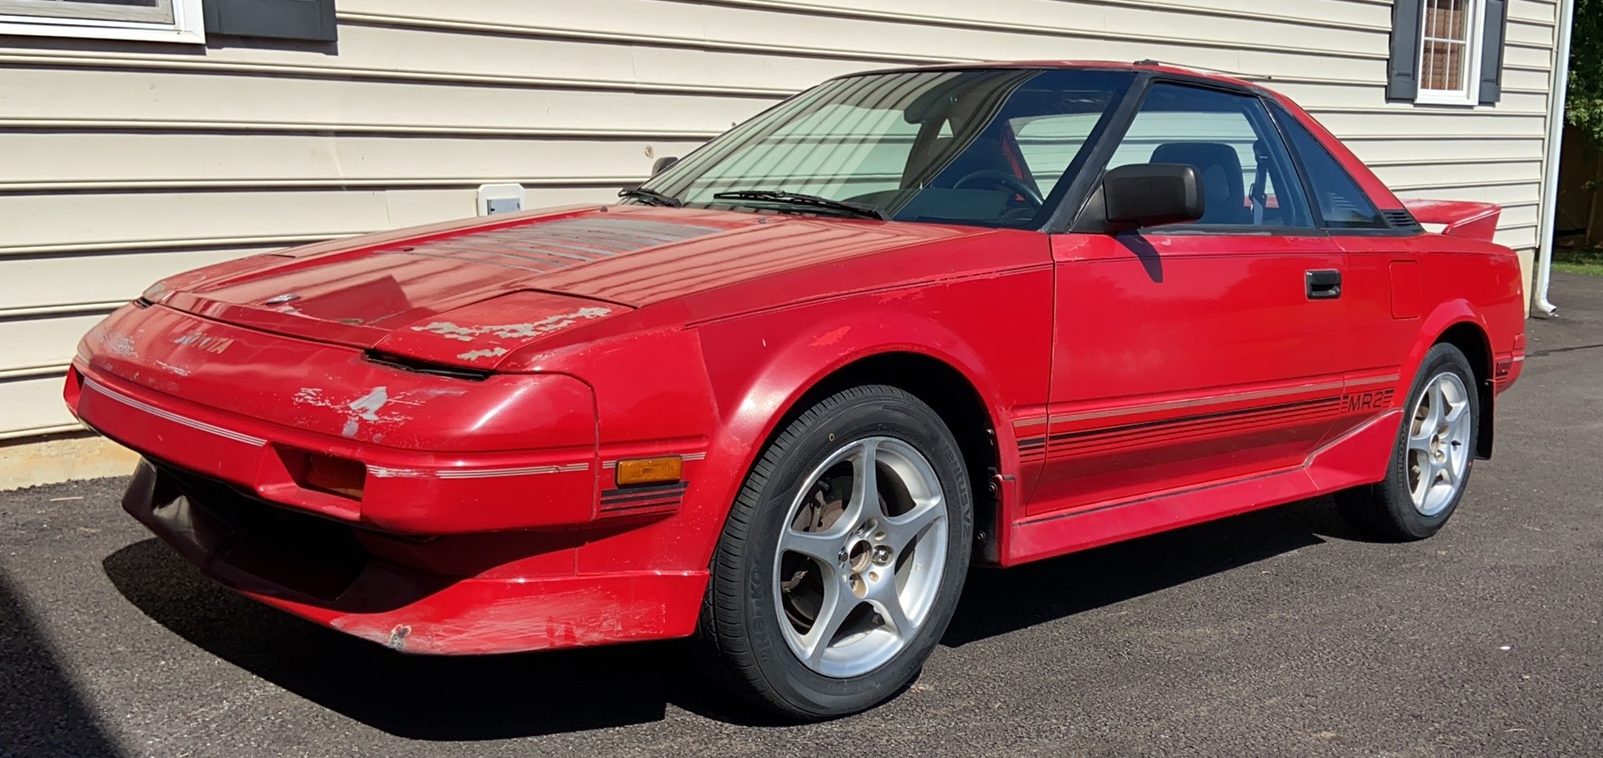 Red 1987 AW11 MR2 side view as purchased